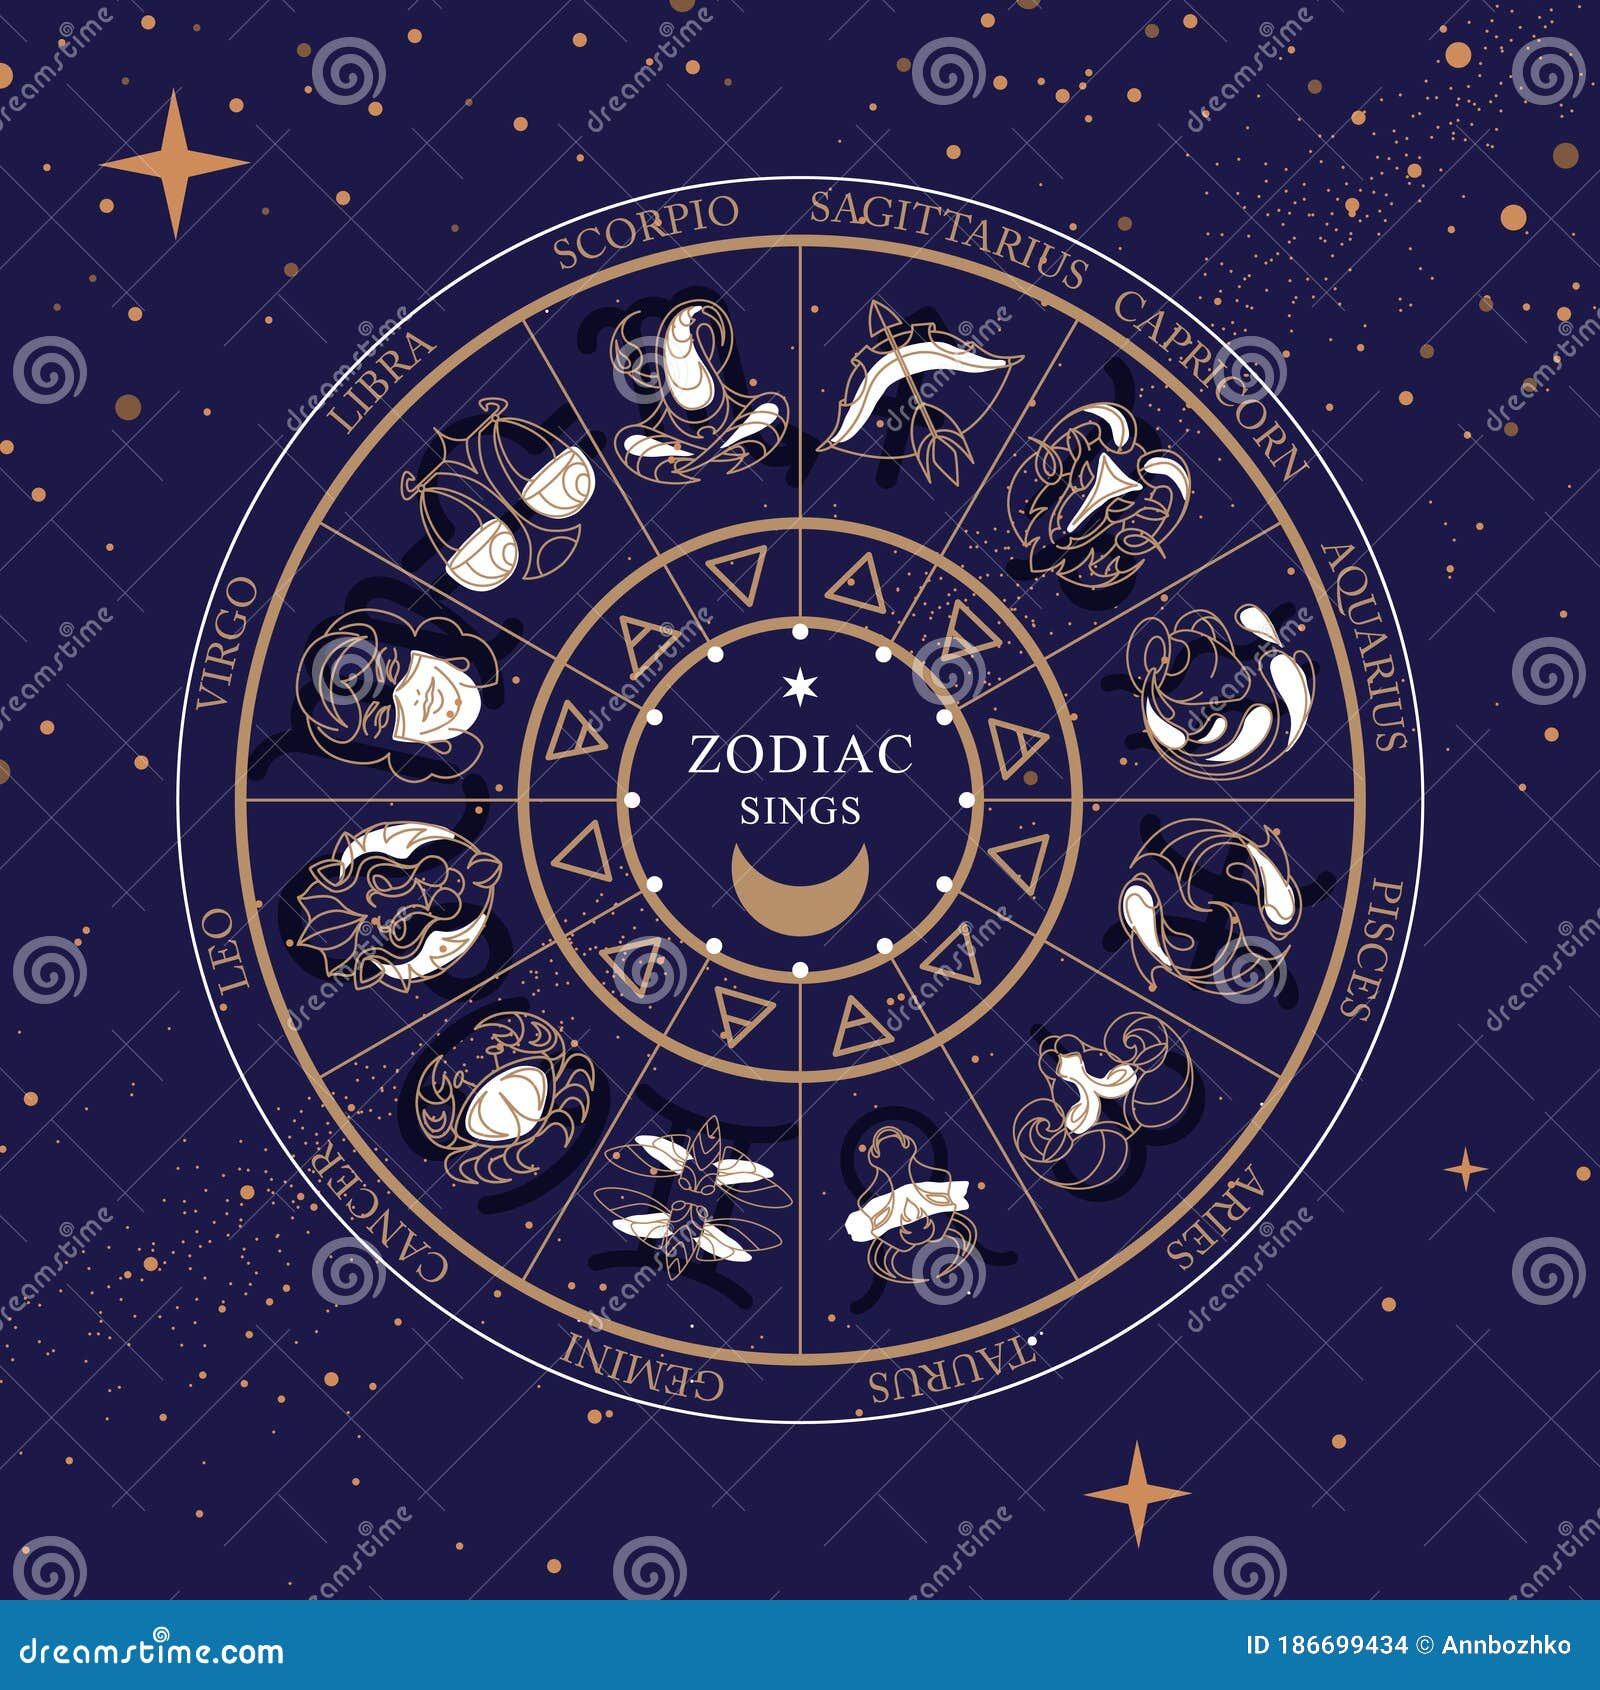 Modern Magic Witchcraft Astrology Wheel with Zodiac Signs on Space ...